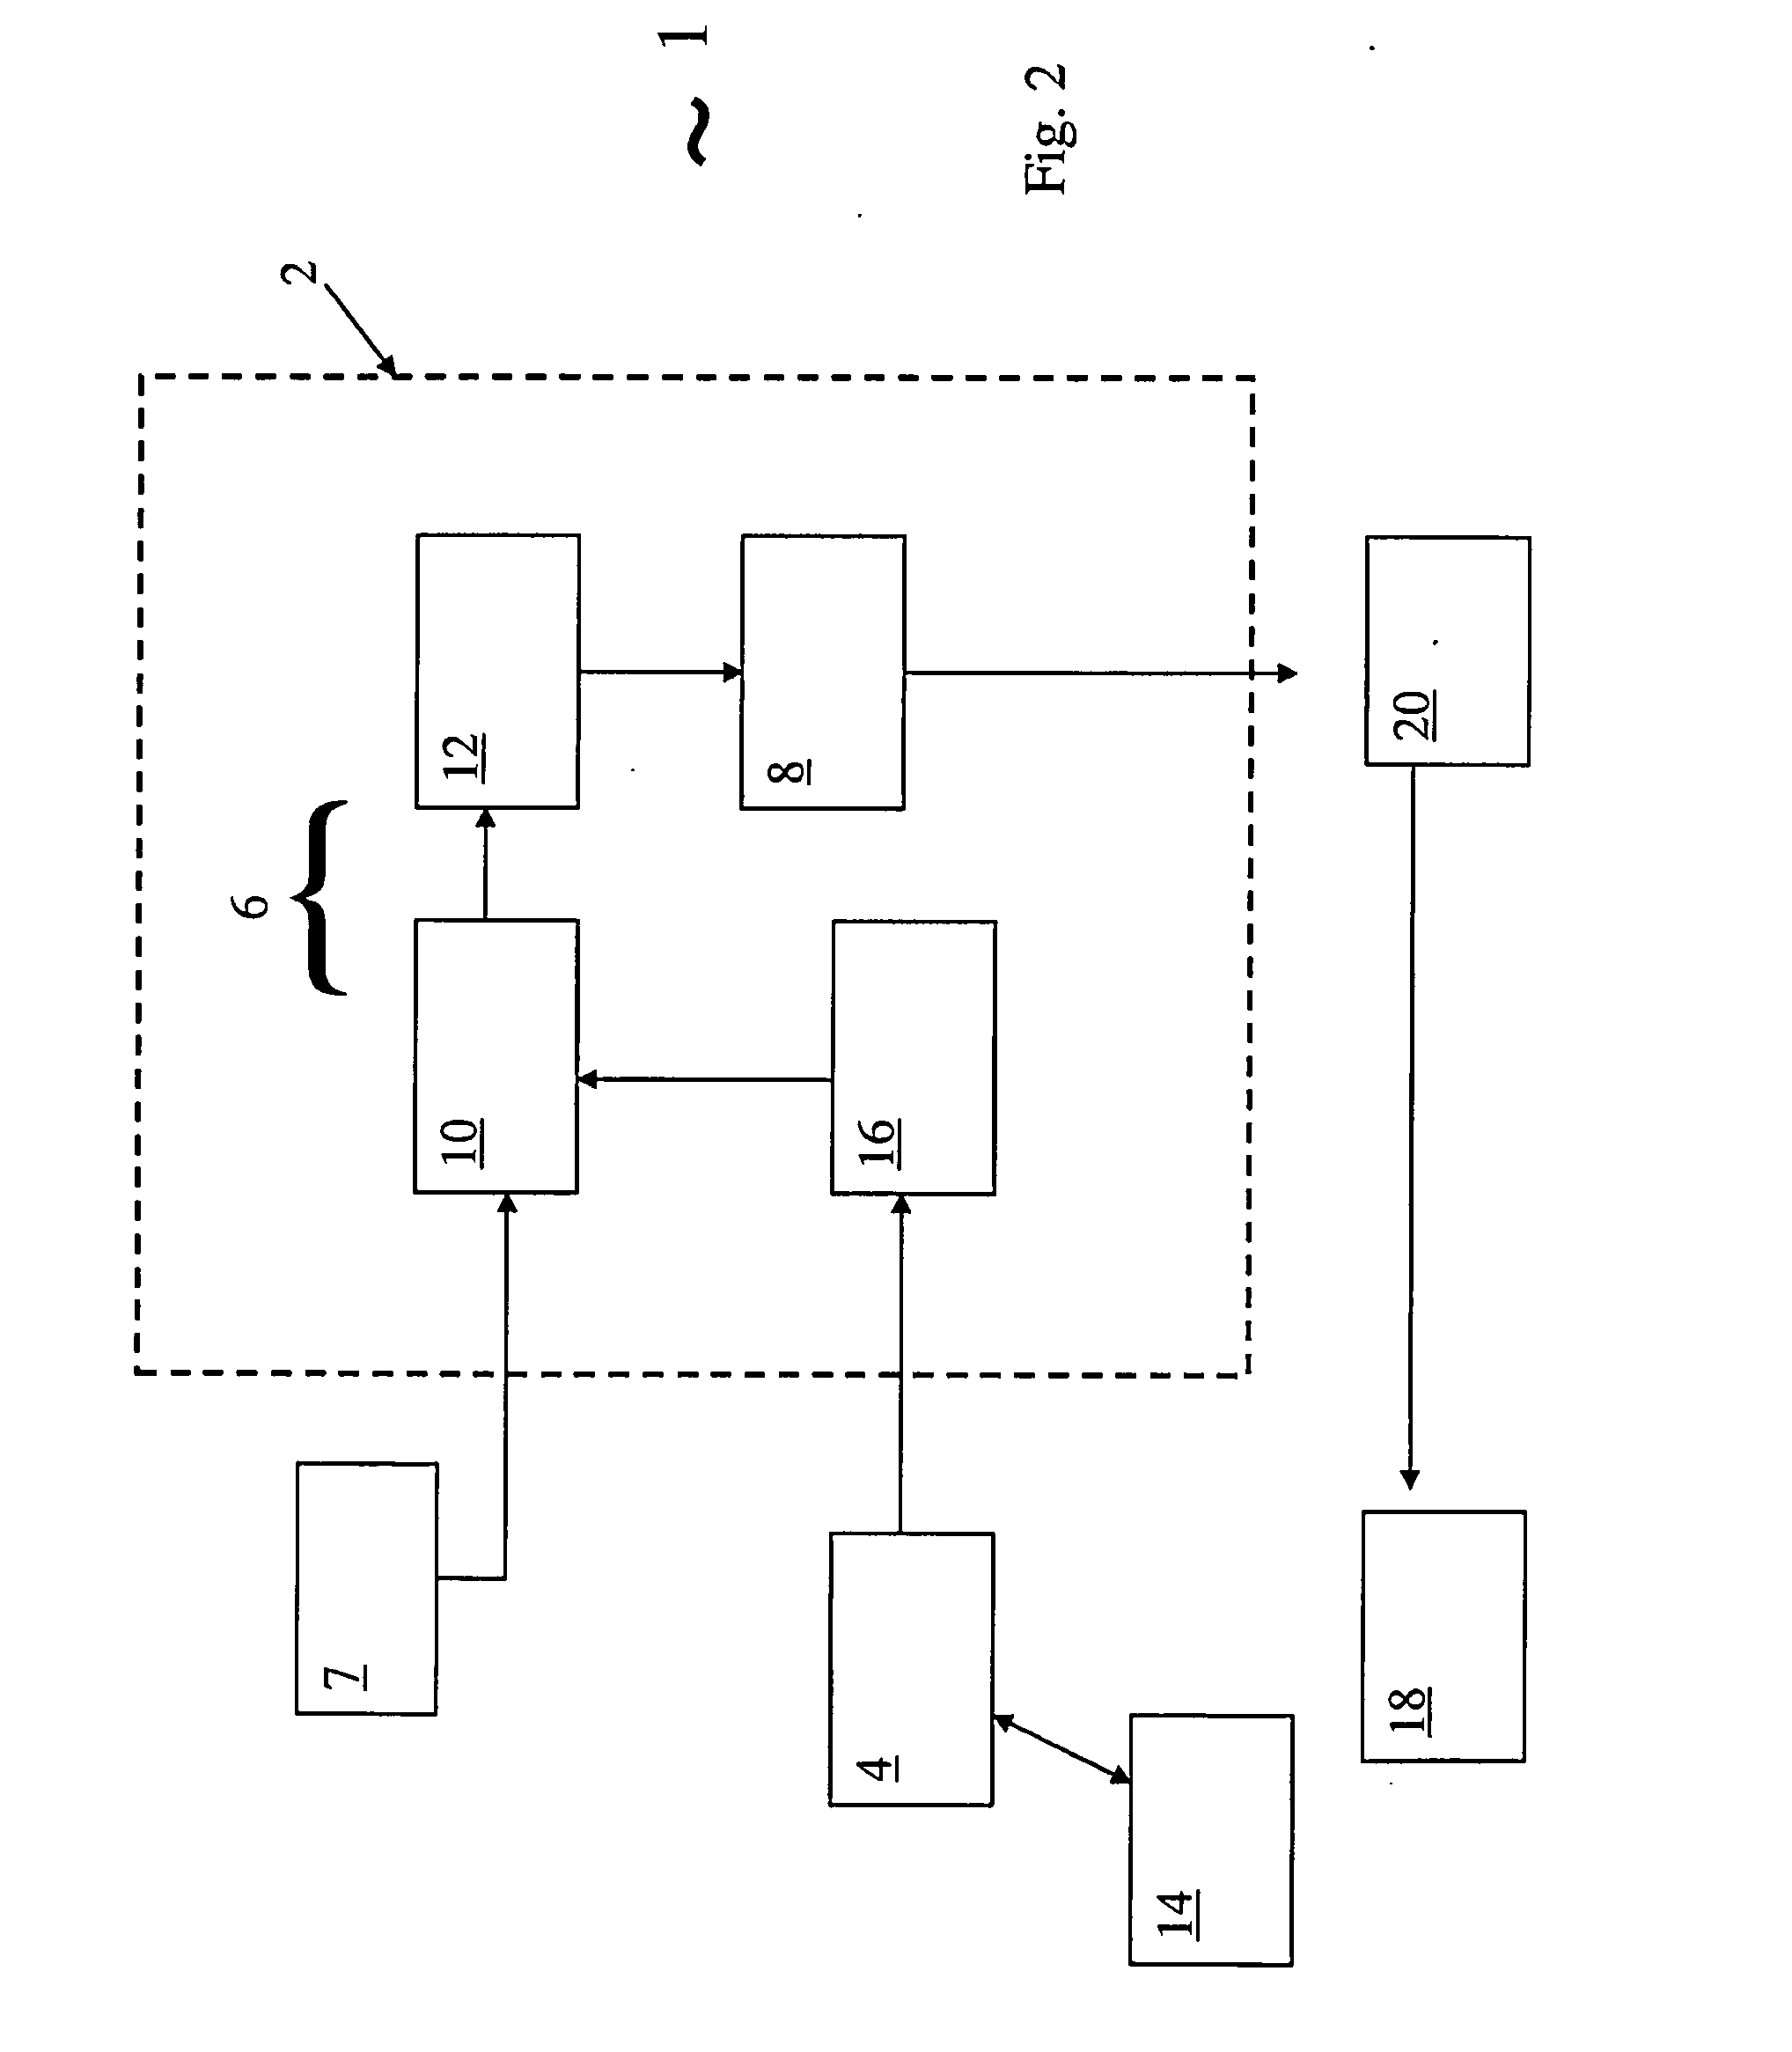 Tof illumination system and tof camera and method for operating, with control means for driving electronic devices located in the scene